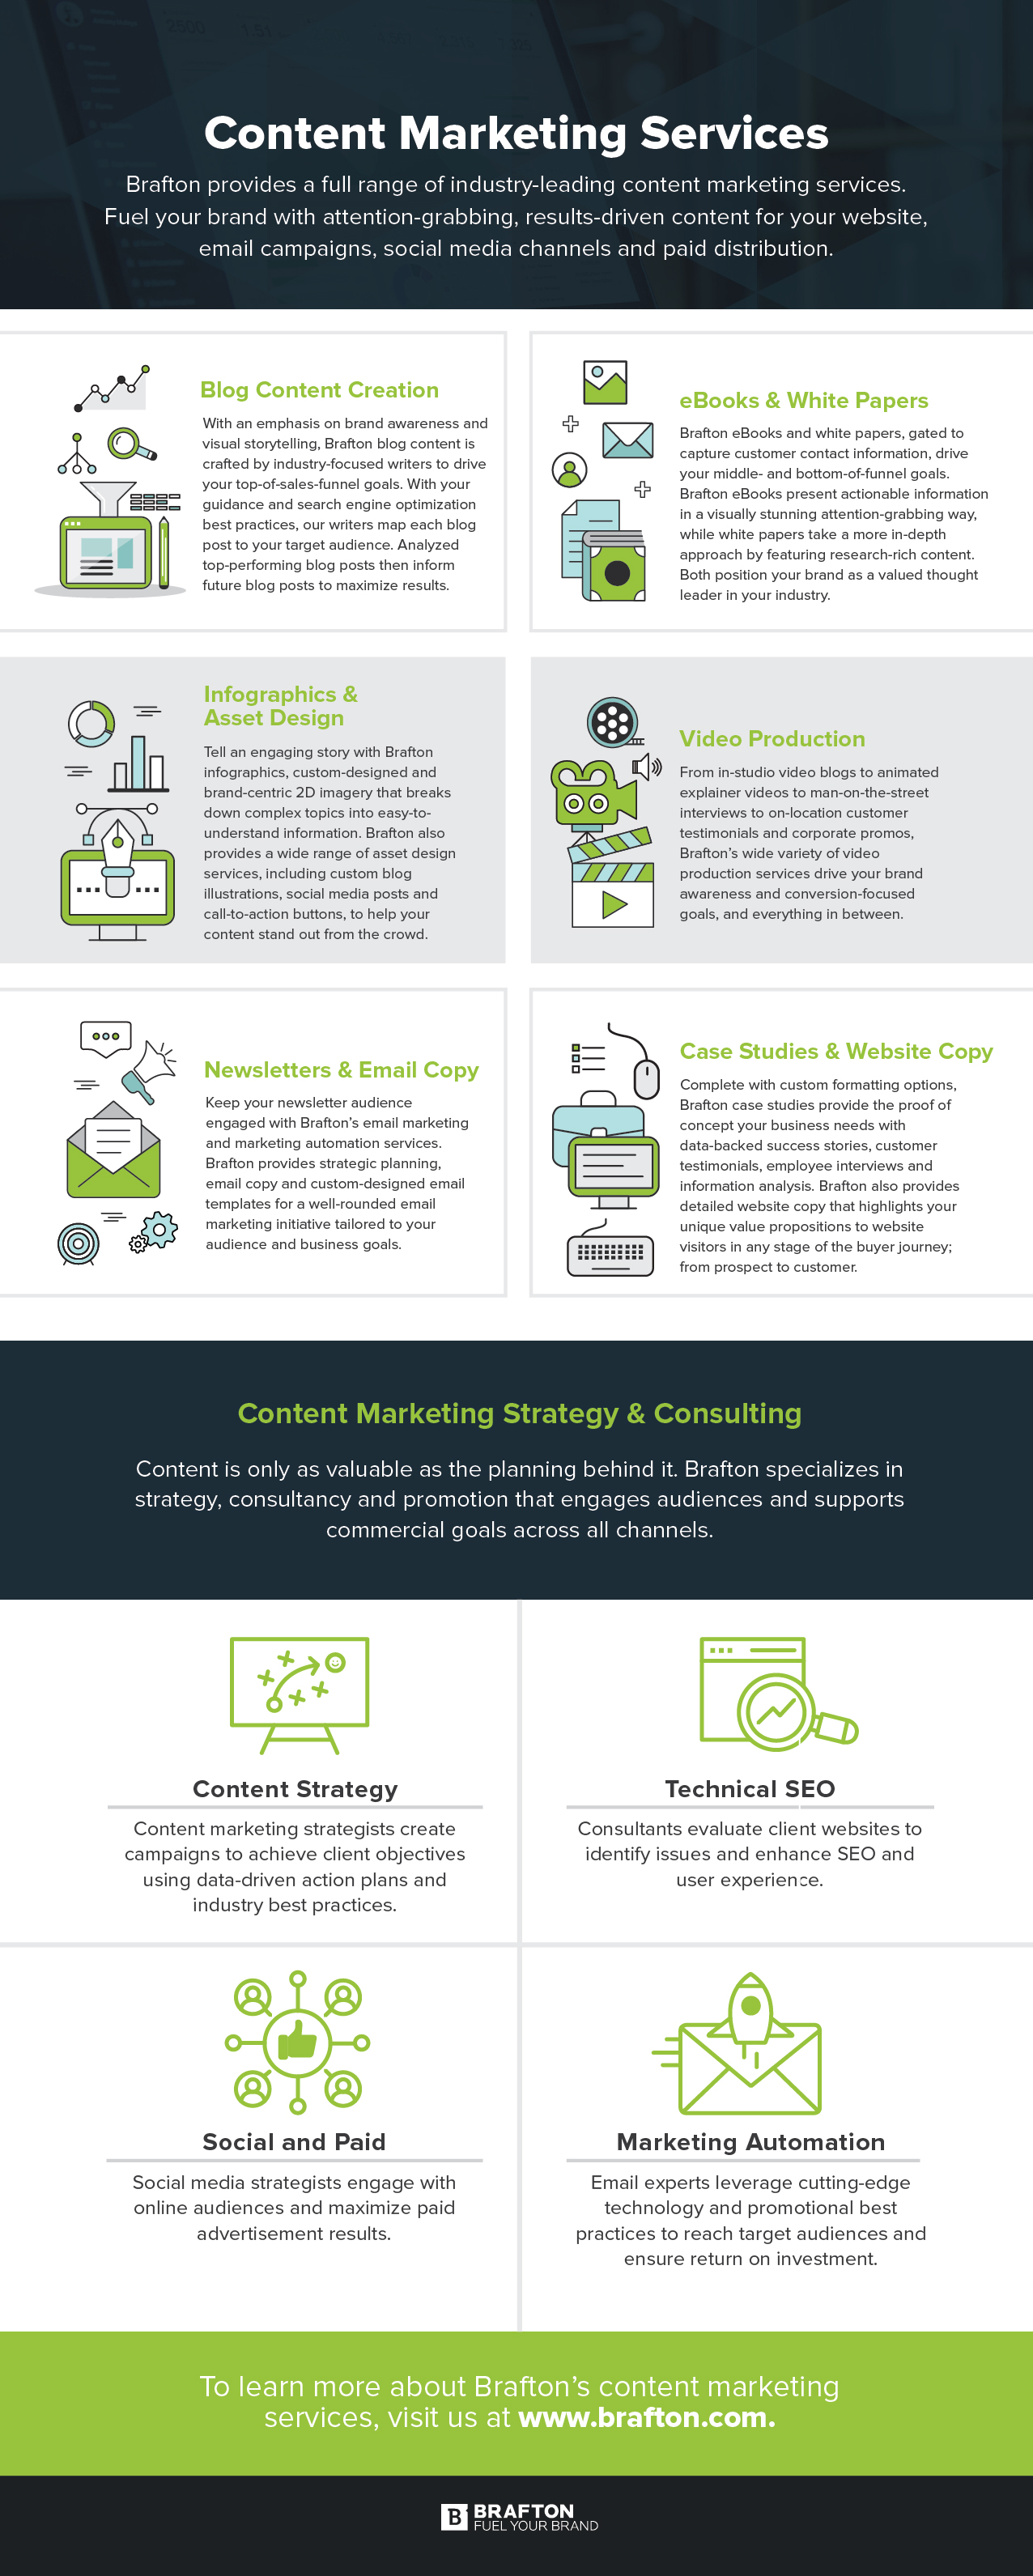 Brafton content marketing services infographic